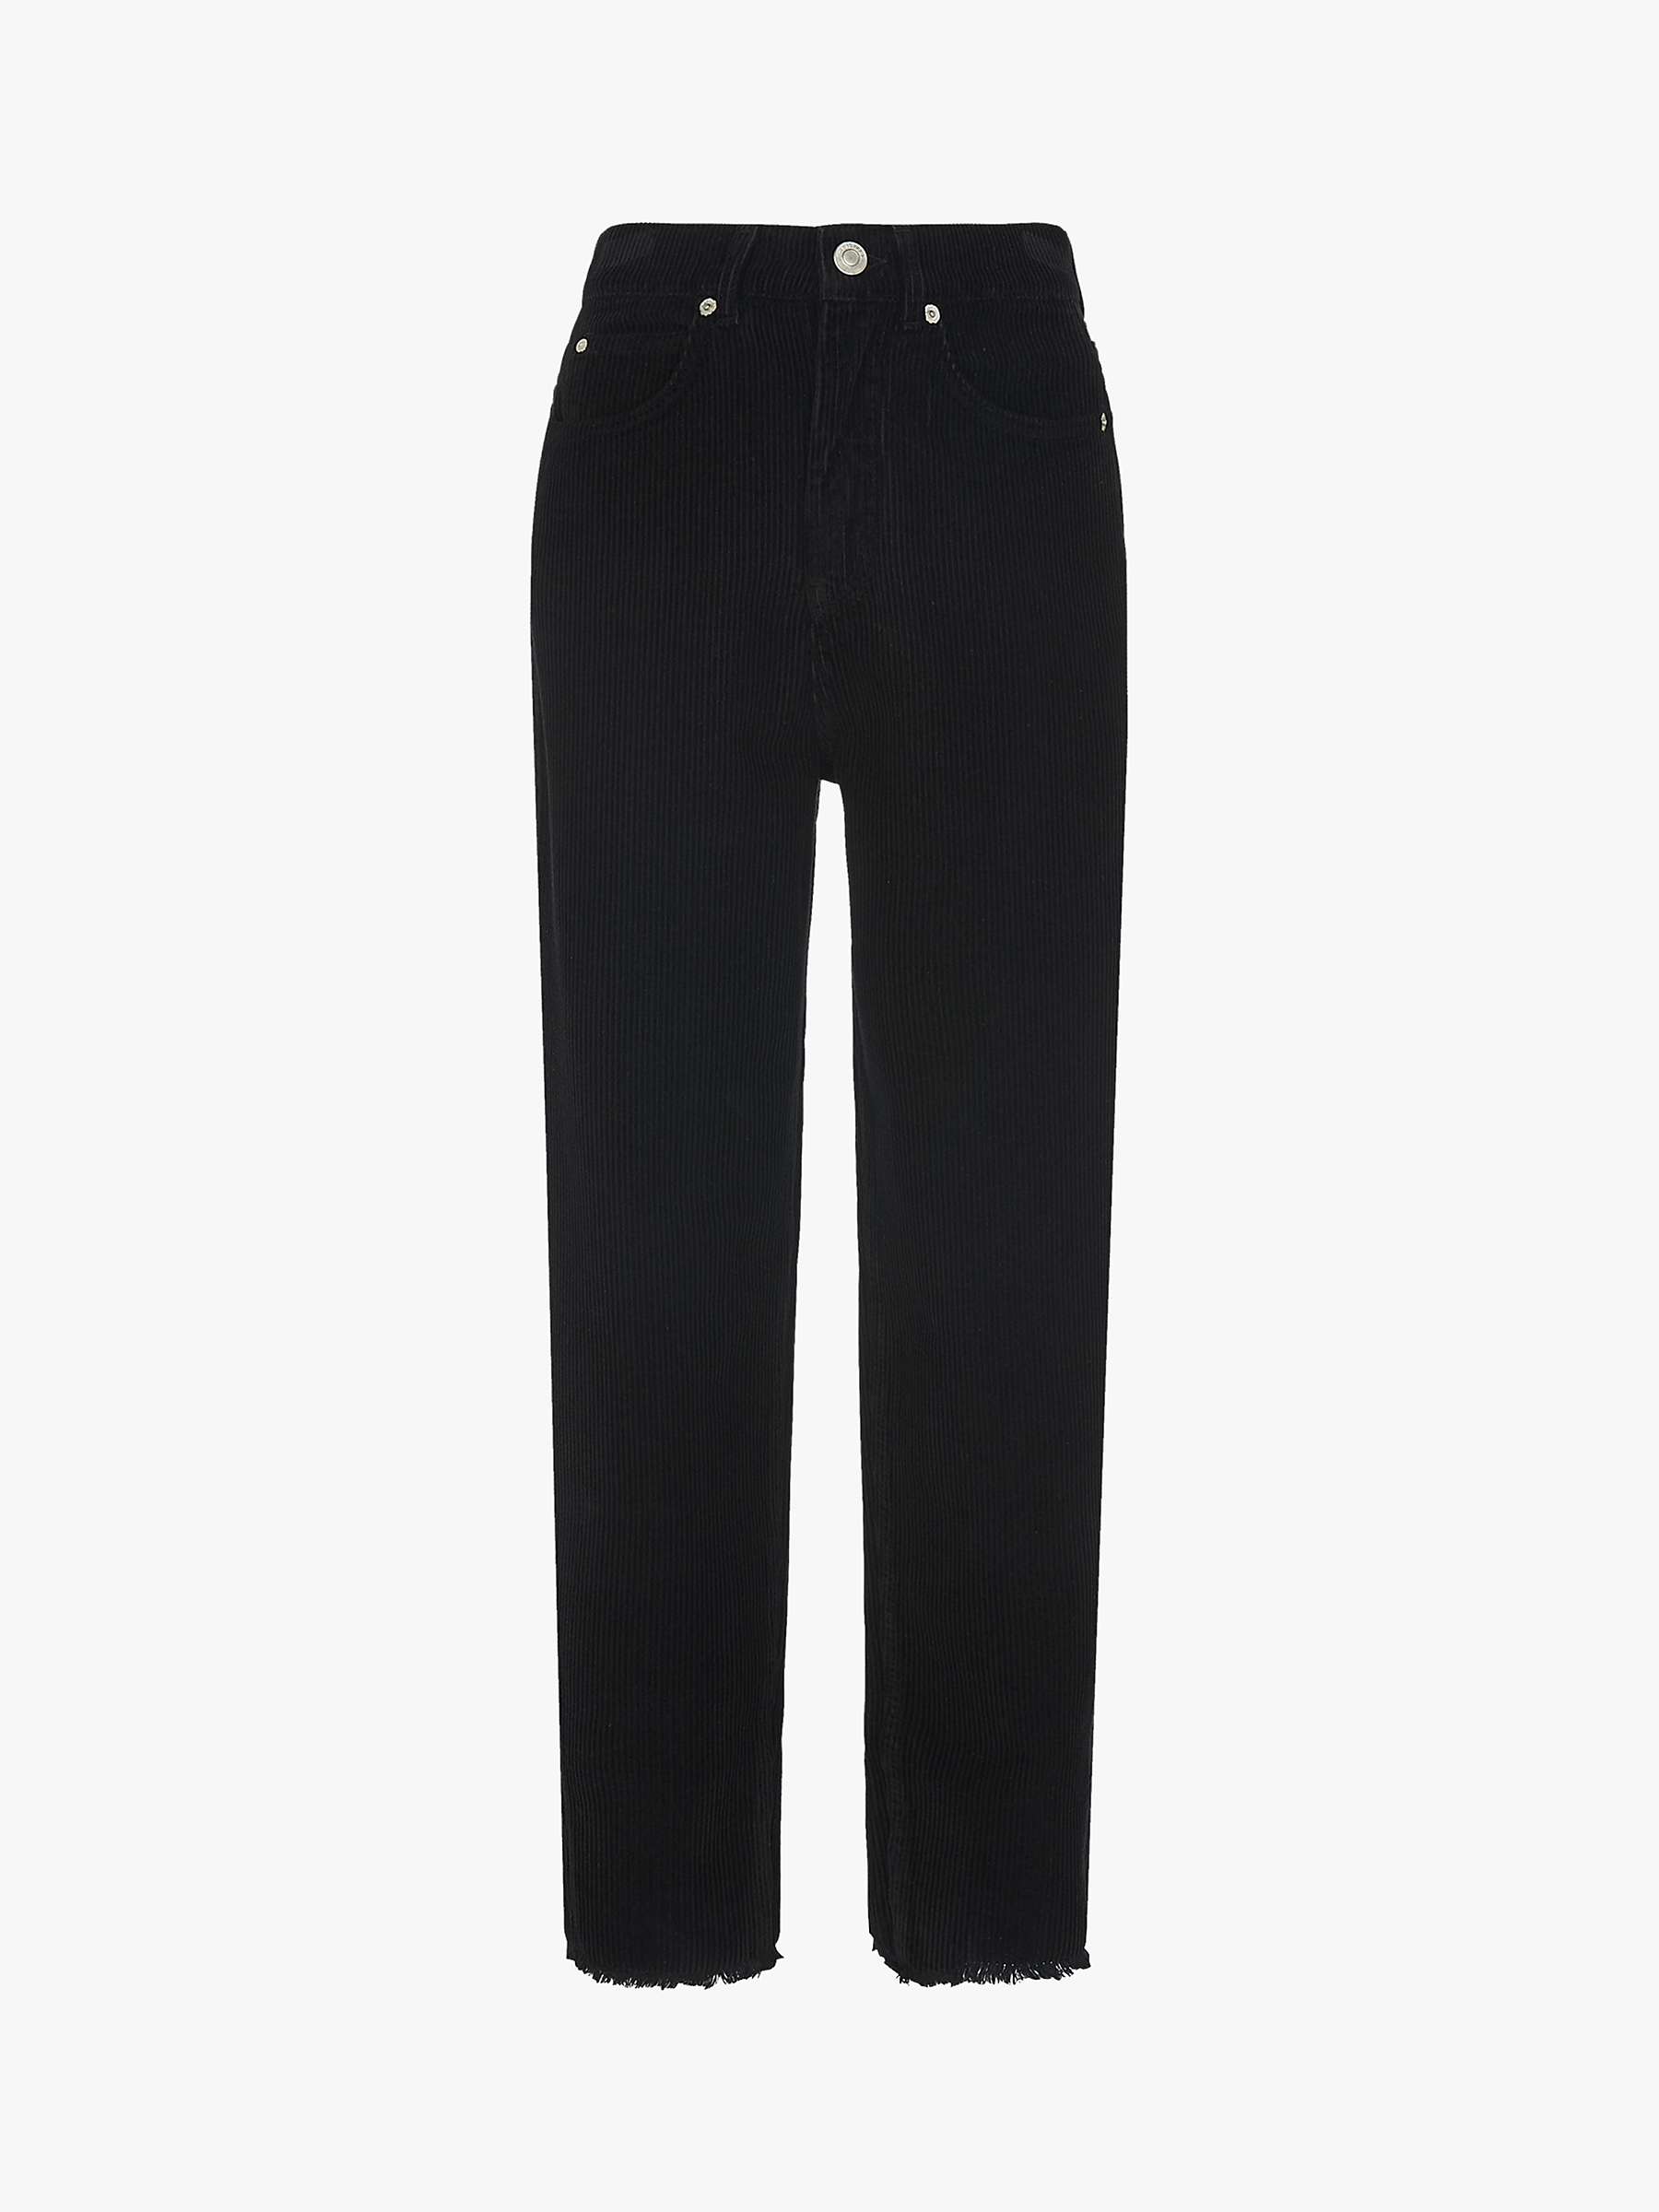 Buy Whistles High Waist Corduroy Trousers, Black Online at johnlewis.com